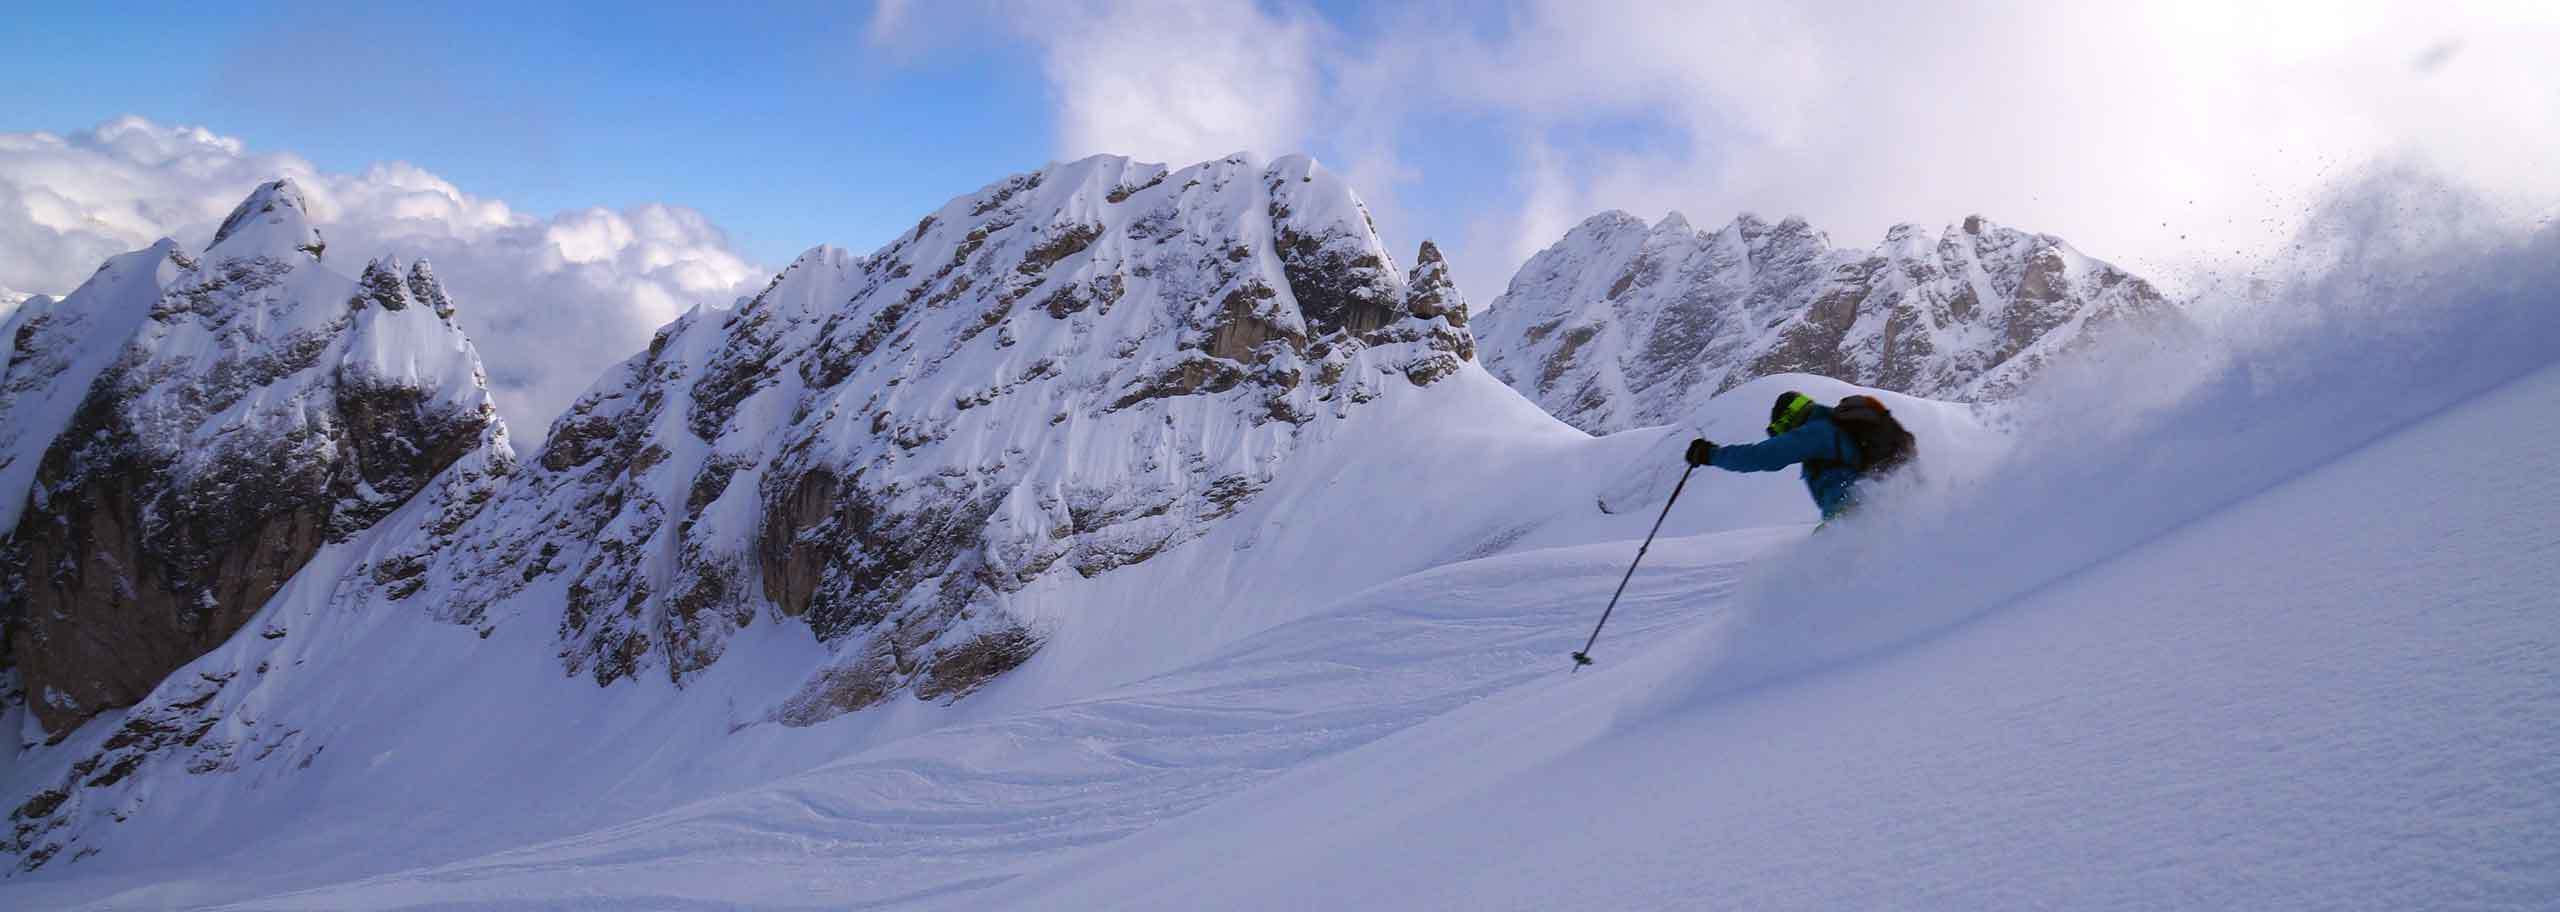 Marmolada Freeride Skiing with a Mountain Guide